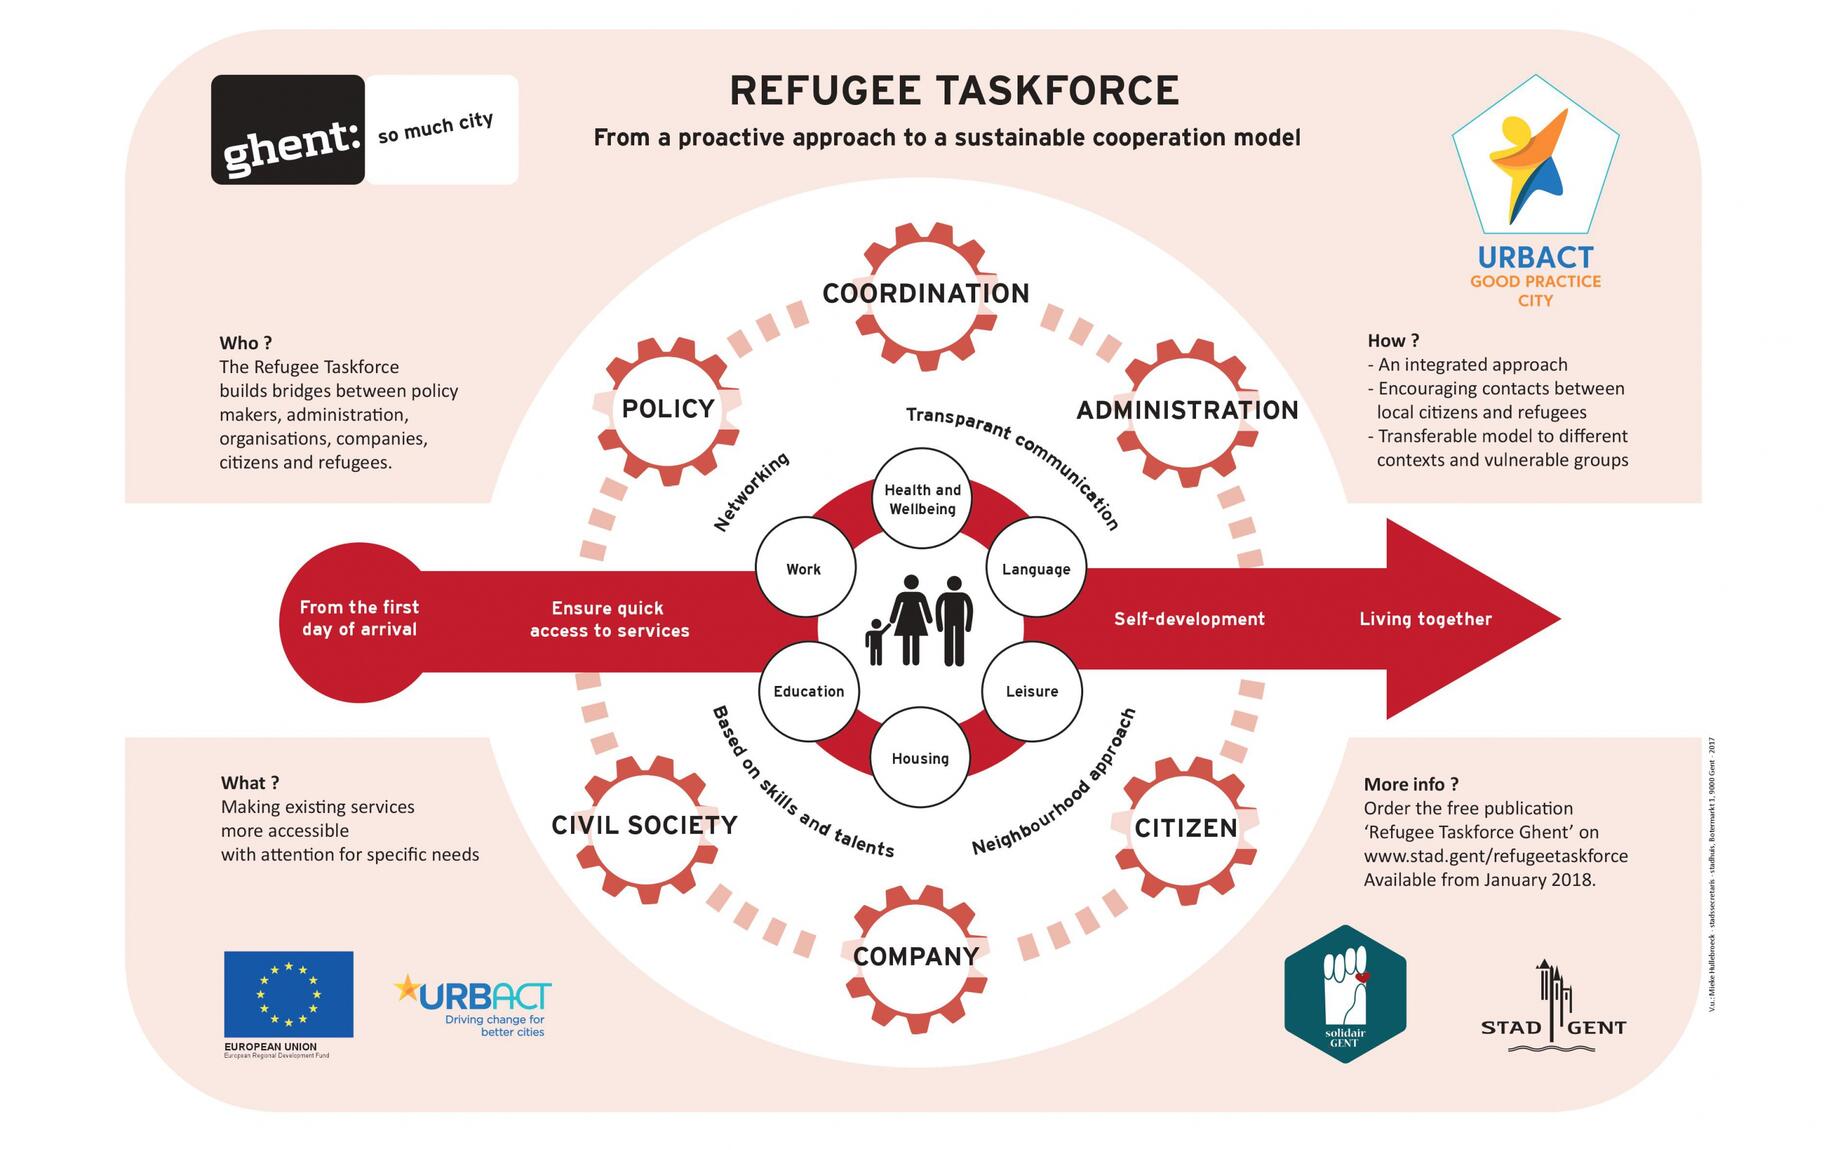 Infographic about the Refugee Taskforce Ghent